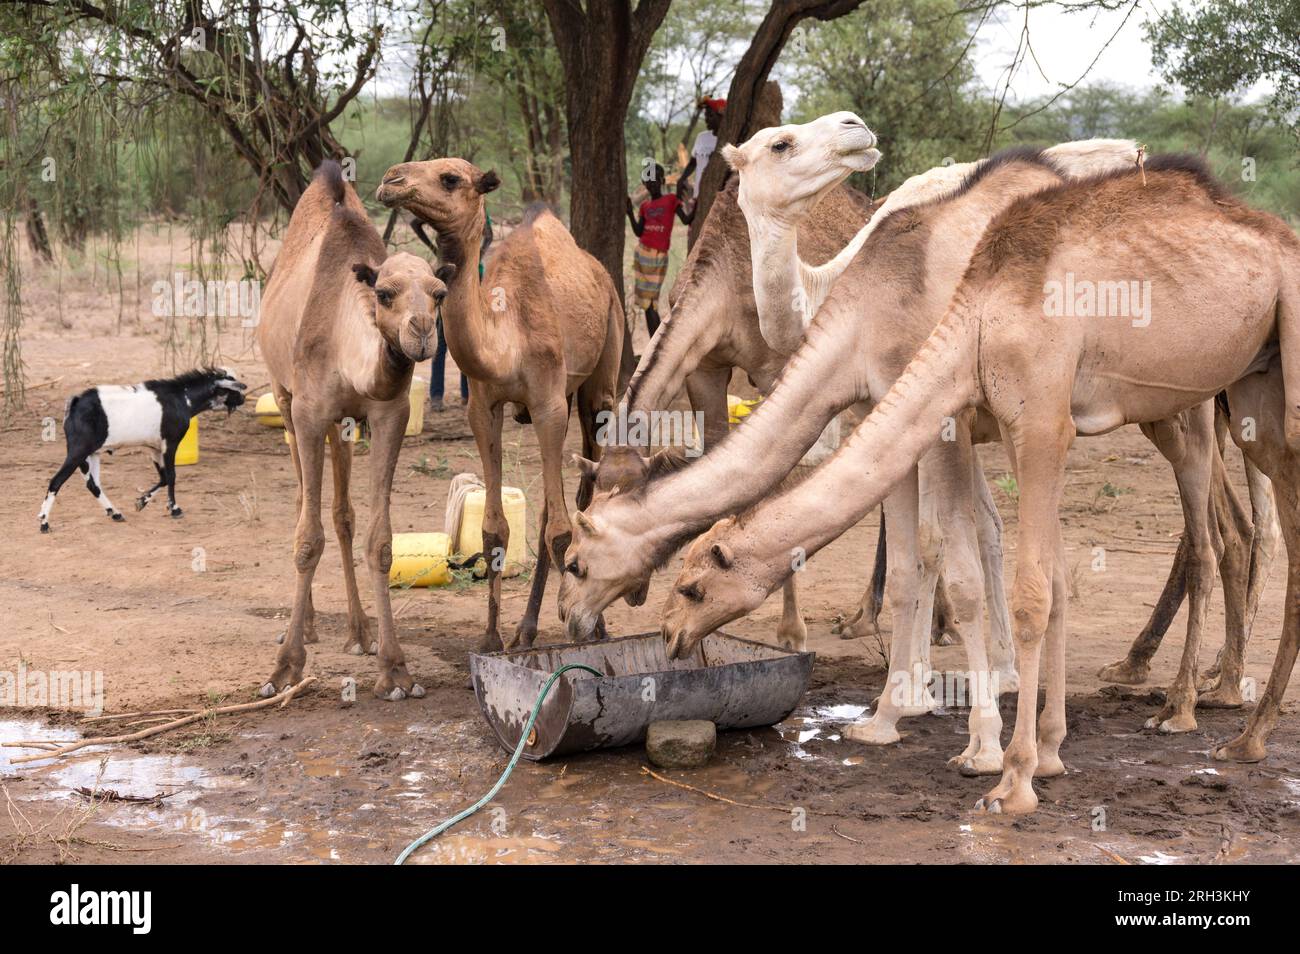 Camels drink from a water barrel with water from a nearby pump, Baringo County, Kenya Stock Photo